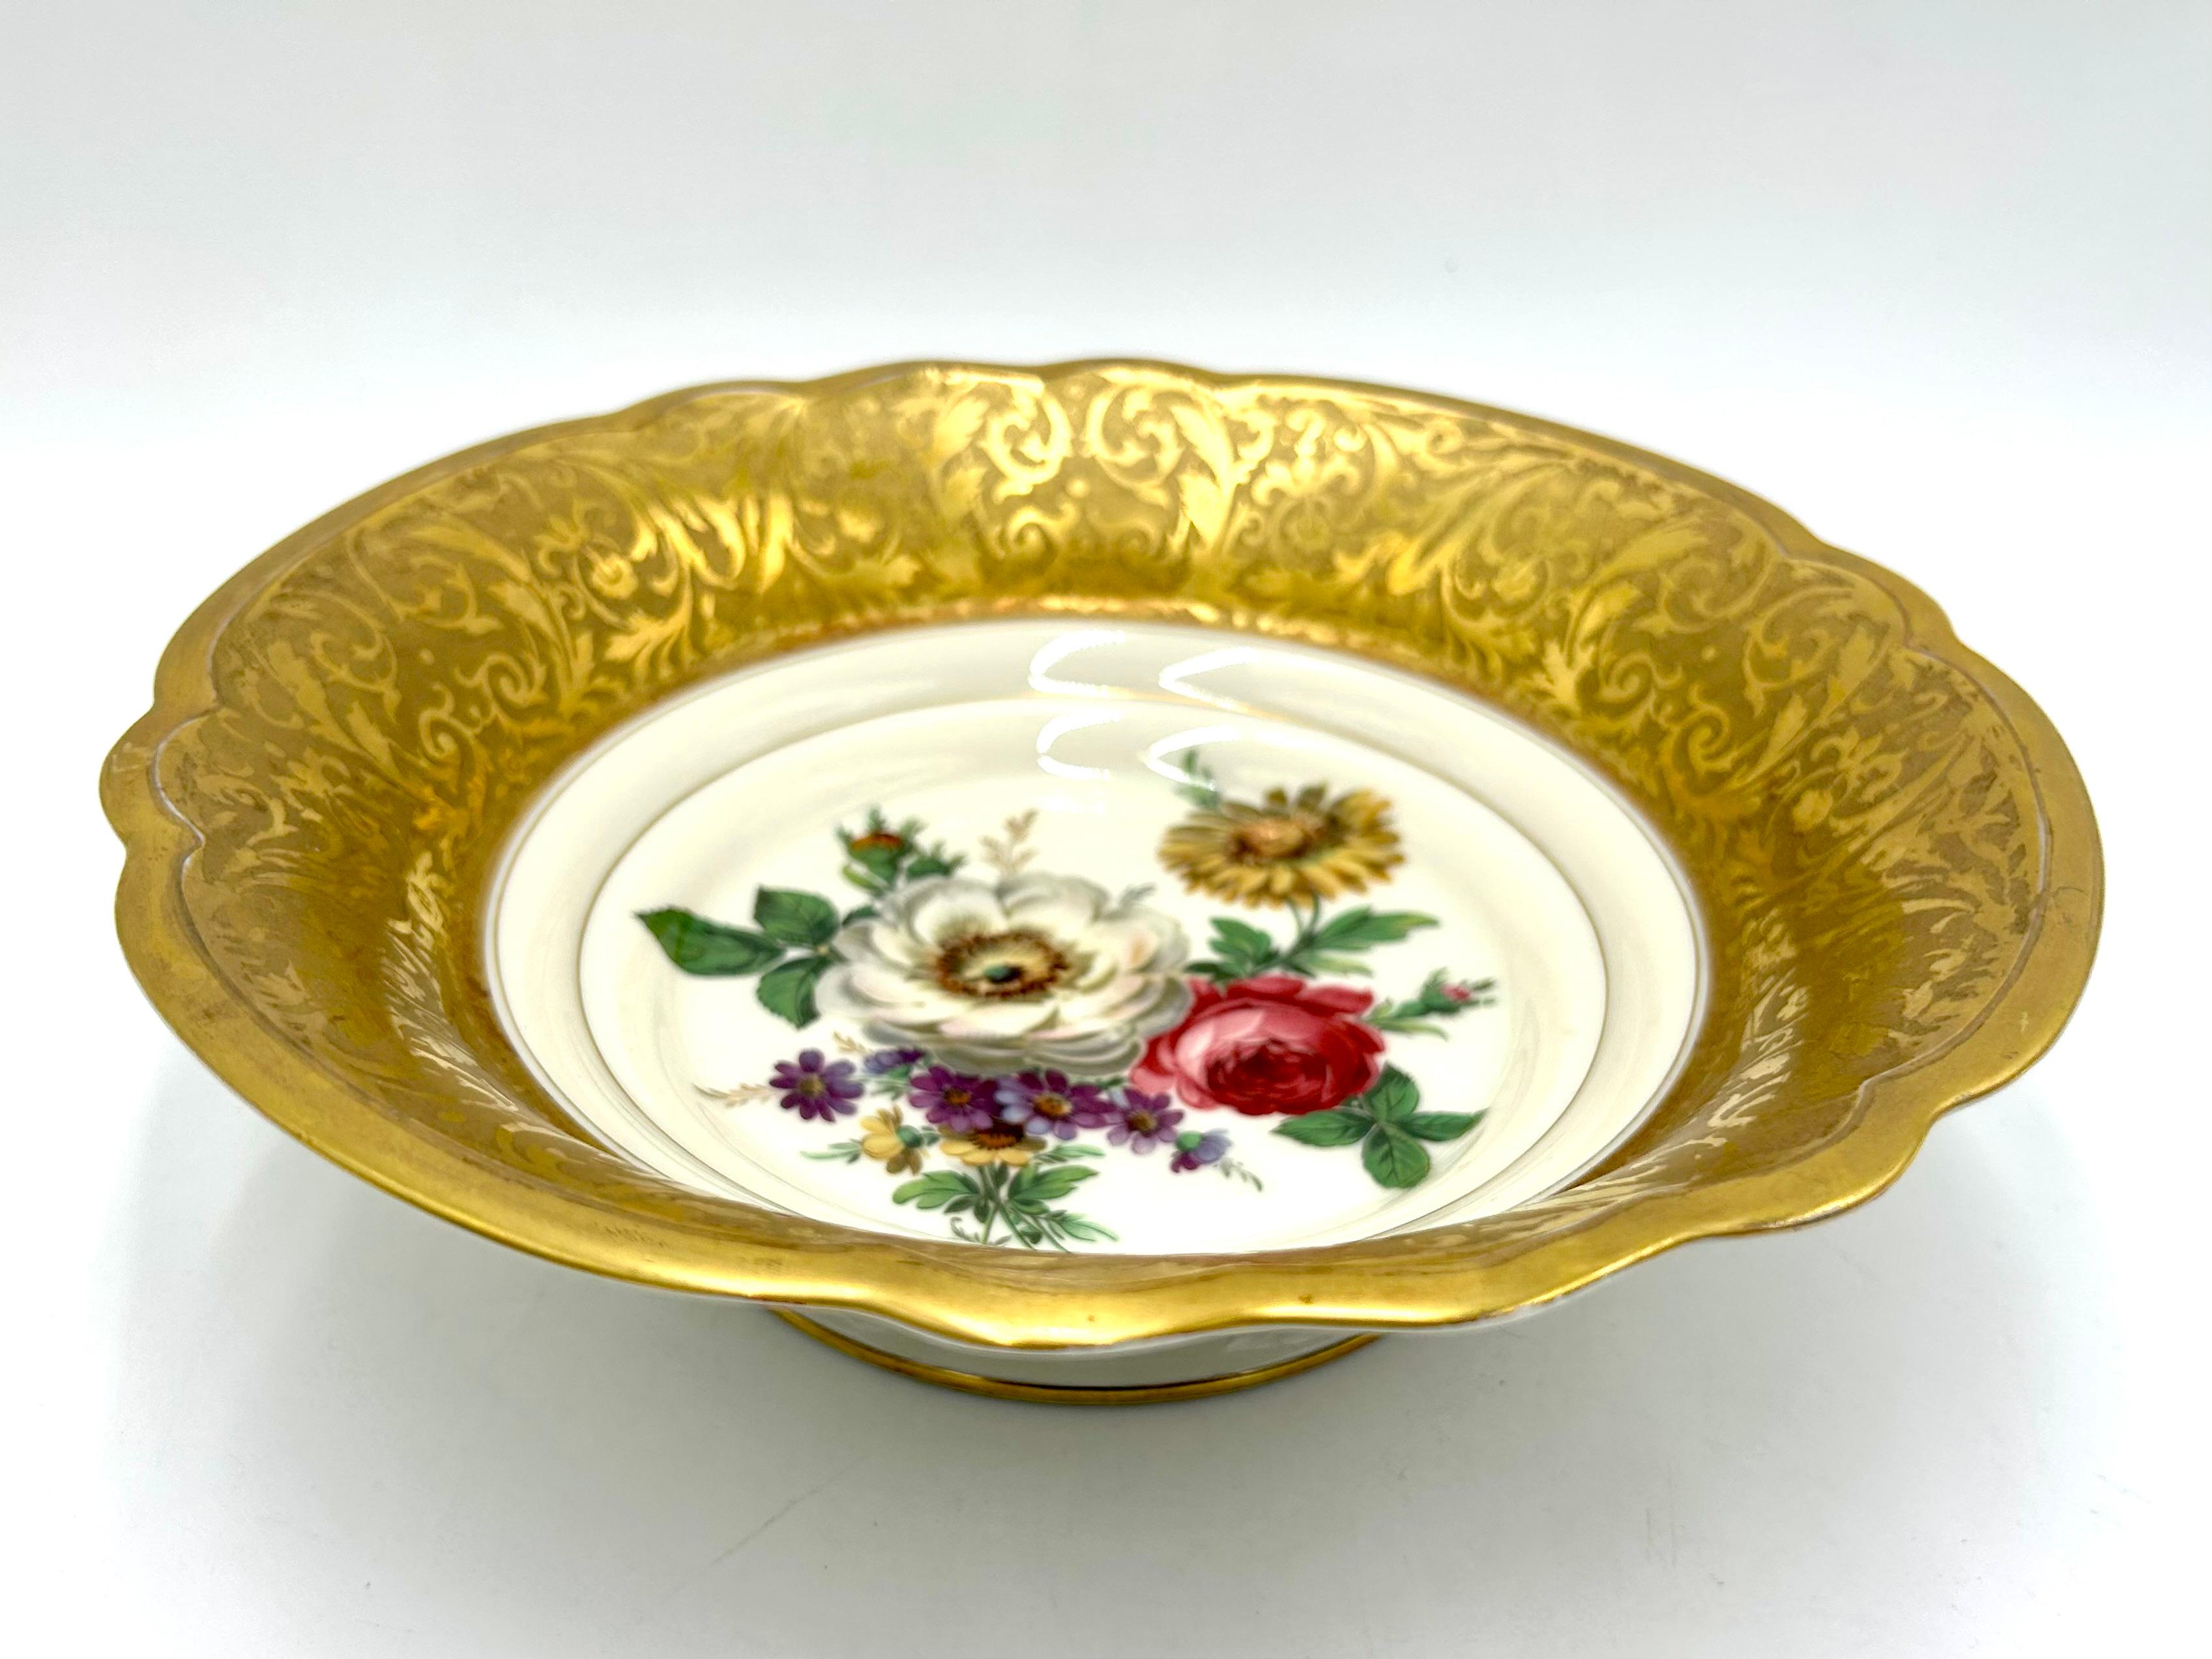 Beautiful porcelain platter-bowl in ecru color decorated with gilding and a floral motif
A product of the valued German Rosenthal manufacturer, marked with the mark used in the years 1938-1952.
Platter from the classic beautiful Pompadour series.